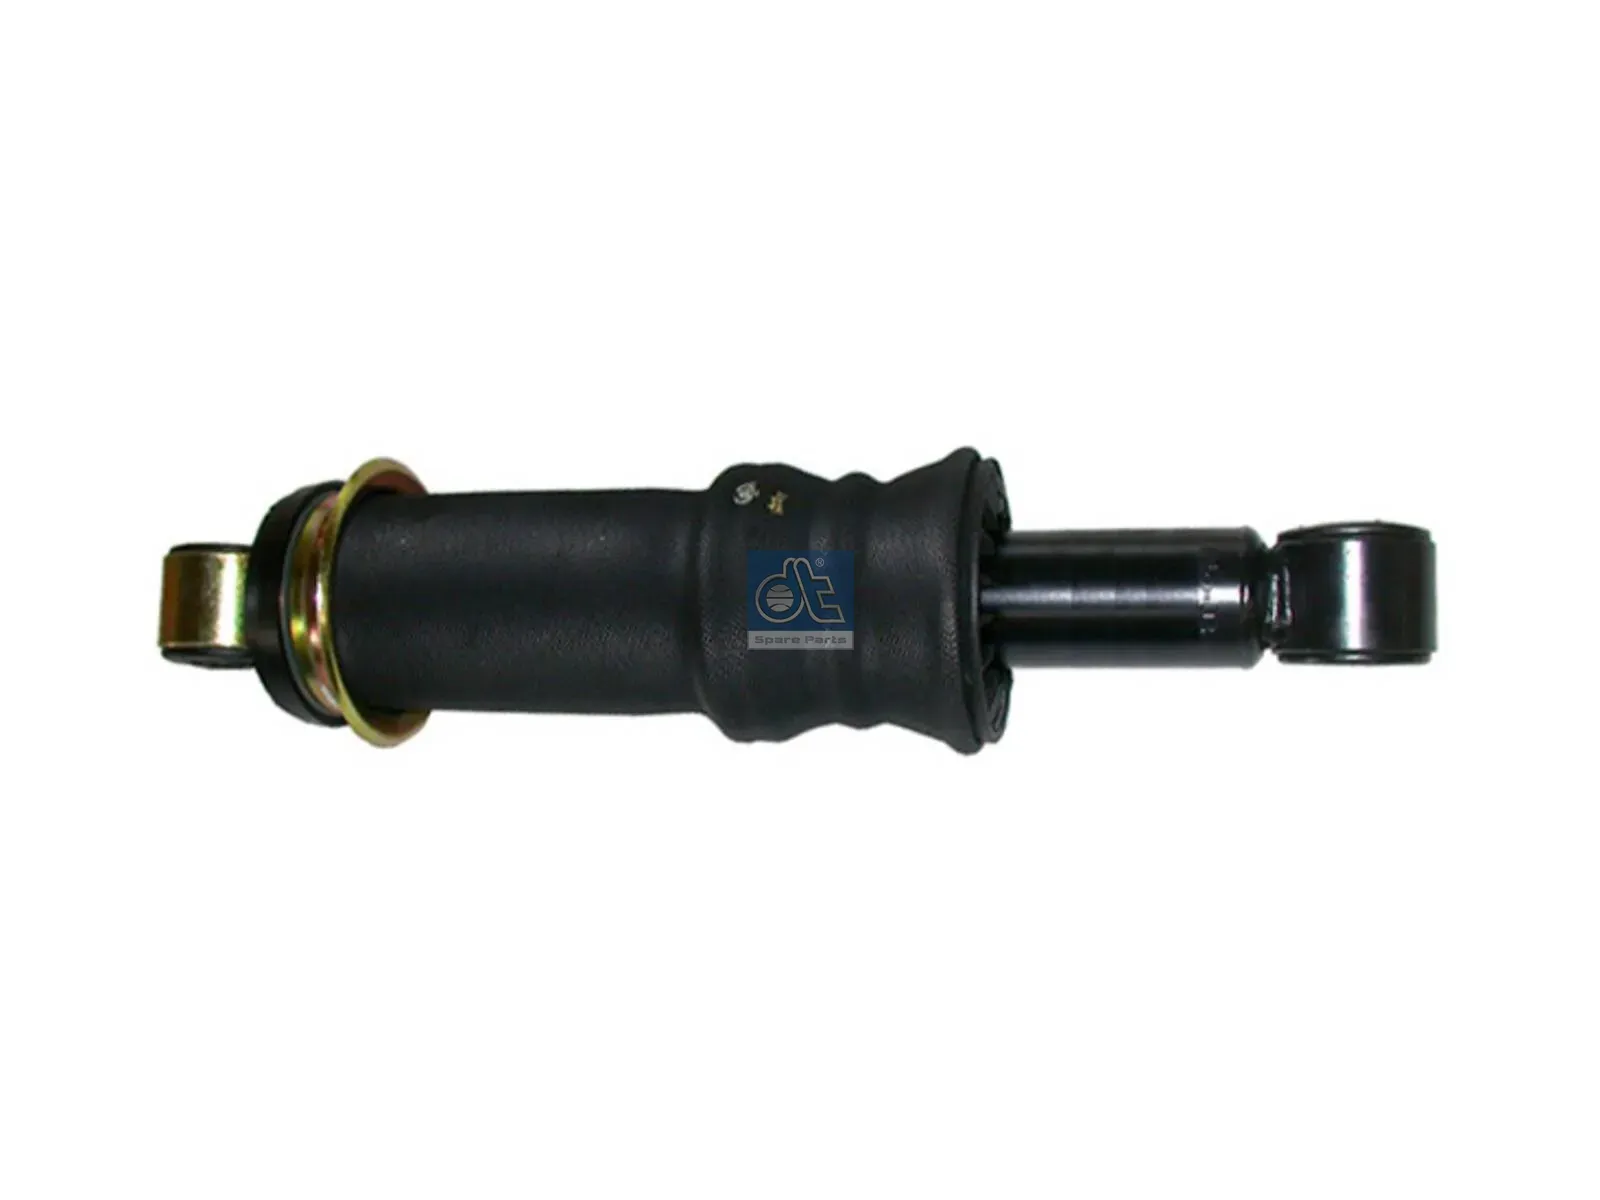 Cabin shock absorber, with air bellow